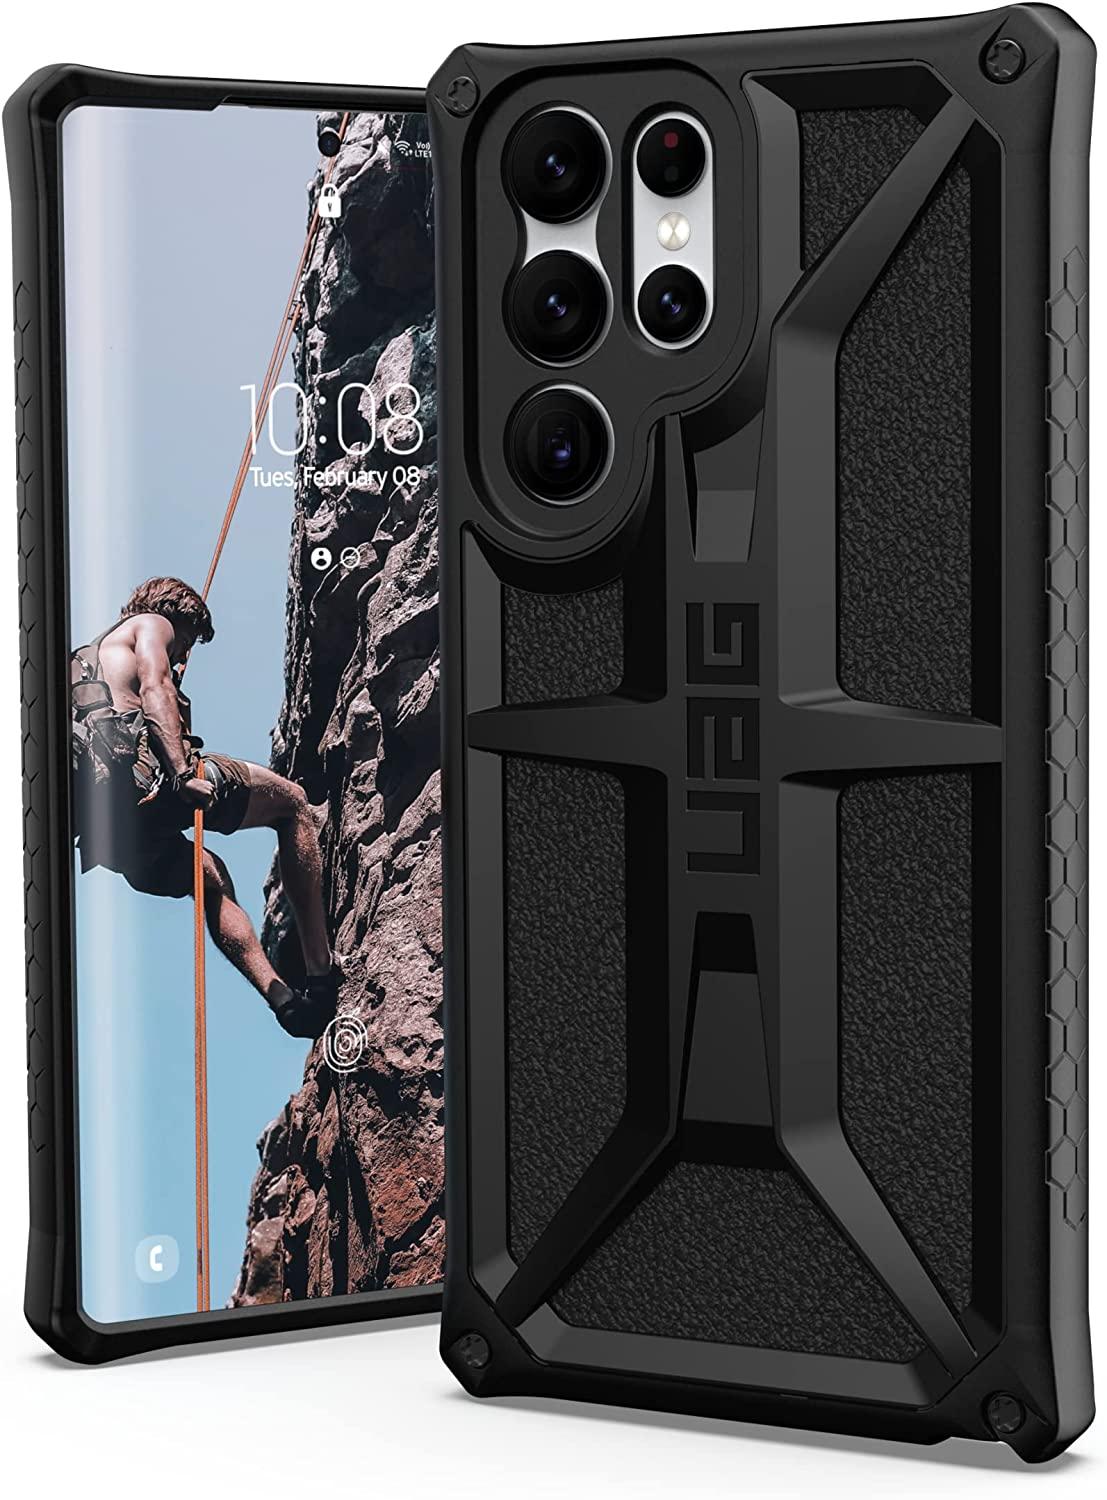 Keep your new Samsung Galaxy S22 safe with this durable UAG case 